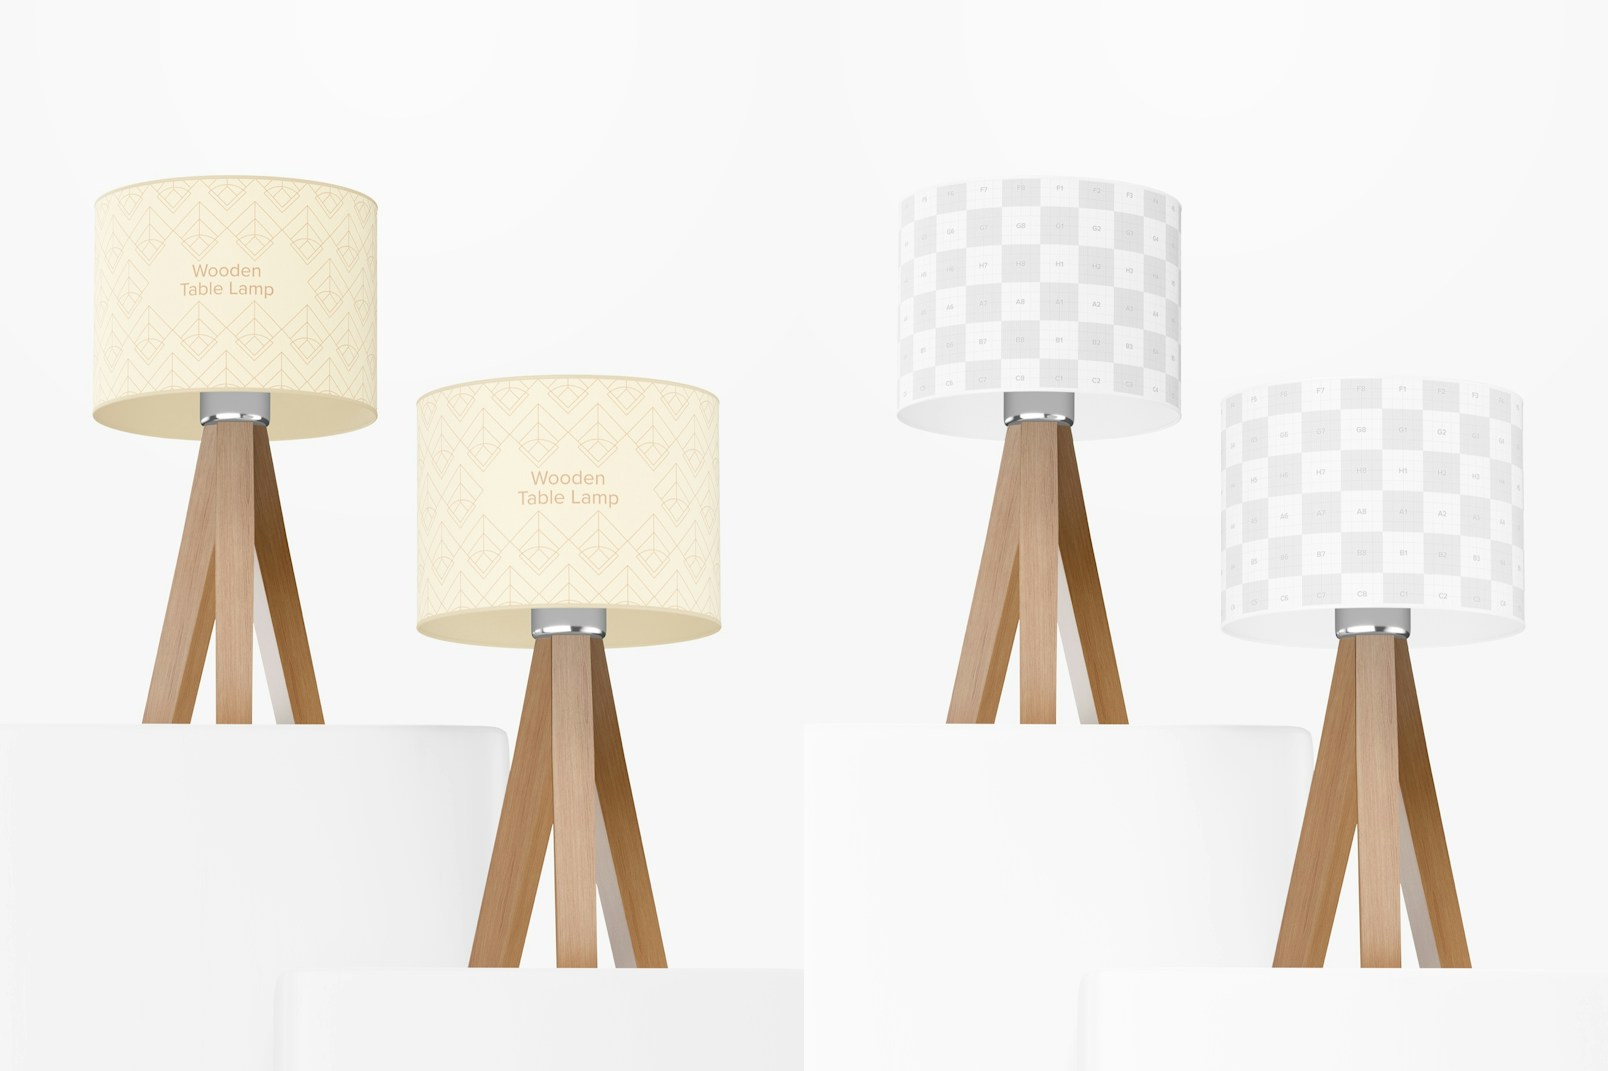 Wooden Table Lamps Mockup